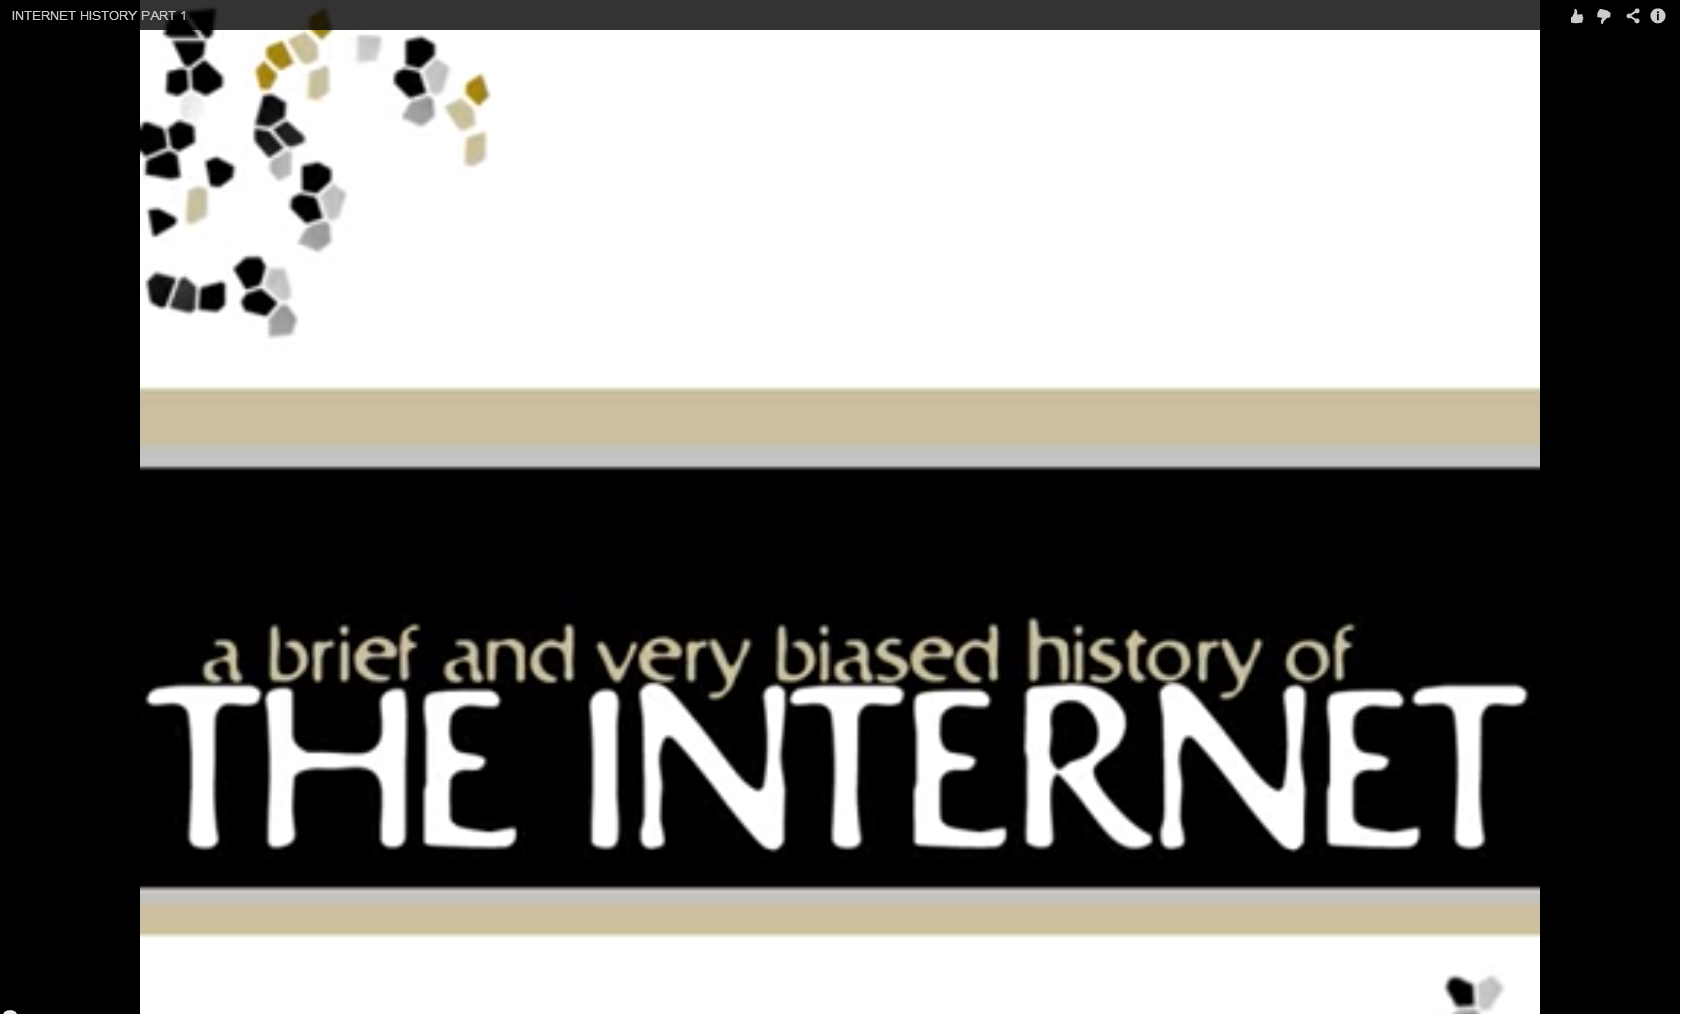 Danielle Nicole DeVoss, "A Brief and Very Biased History of the Internet, Part 1"